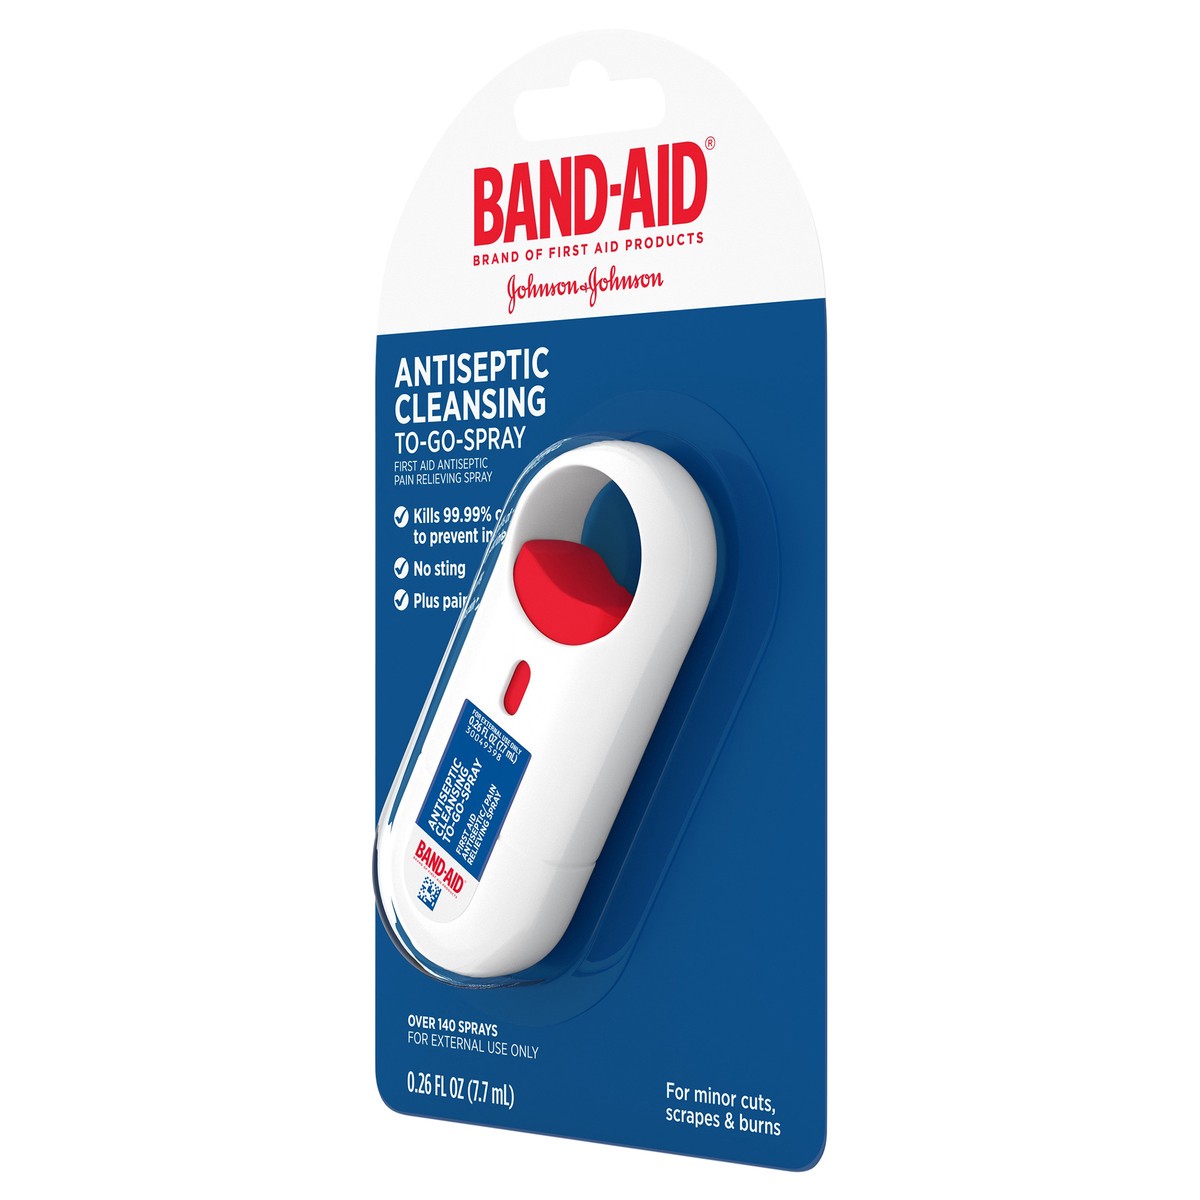 slide 3 of 7, BAND-AID Antiseptic Cleansing To-Go-Spray, First Aid Antiseptic Spray Relieves Pain & Kills Germs Anywhere, Benzalkonium Cl Antiseptic & Pramoxine HCl Topical Analgesic,.26 fl. oz, 0.26 fl oz